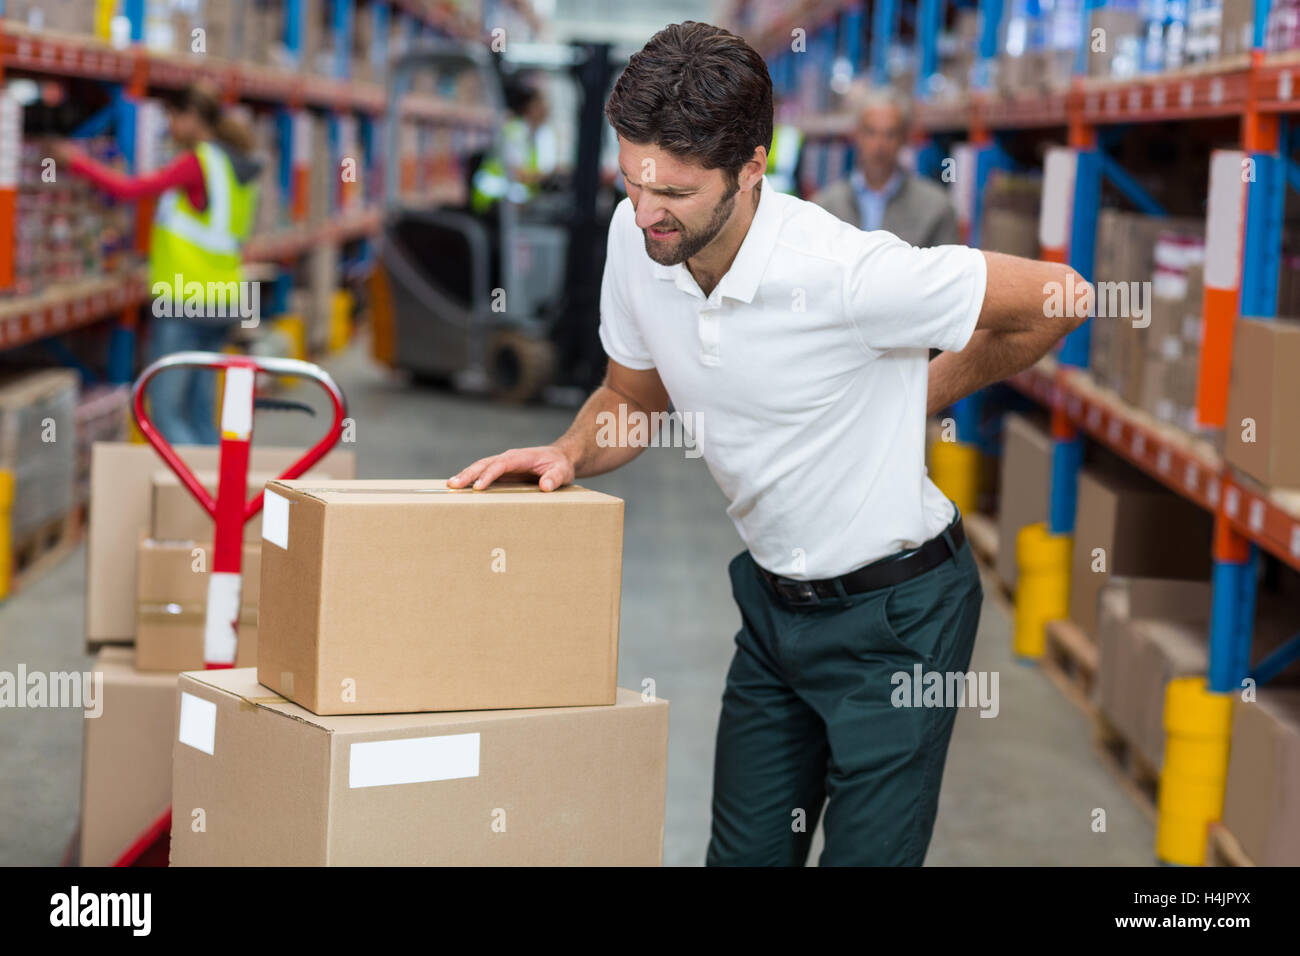 Male worker suffering from back pain while working Stock Photo